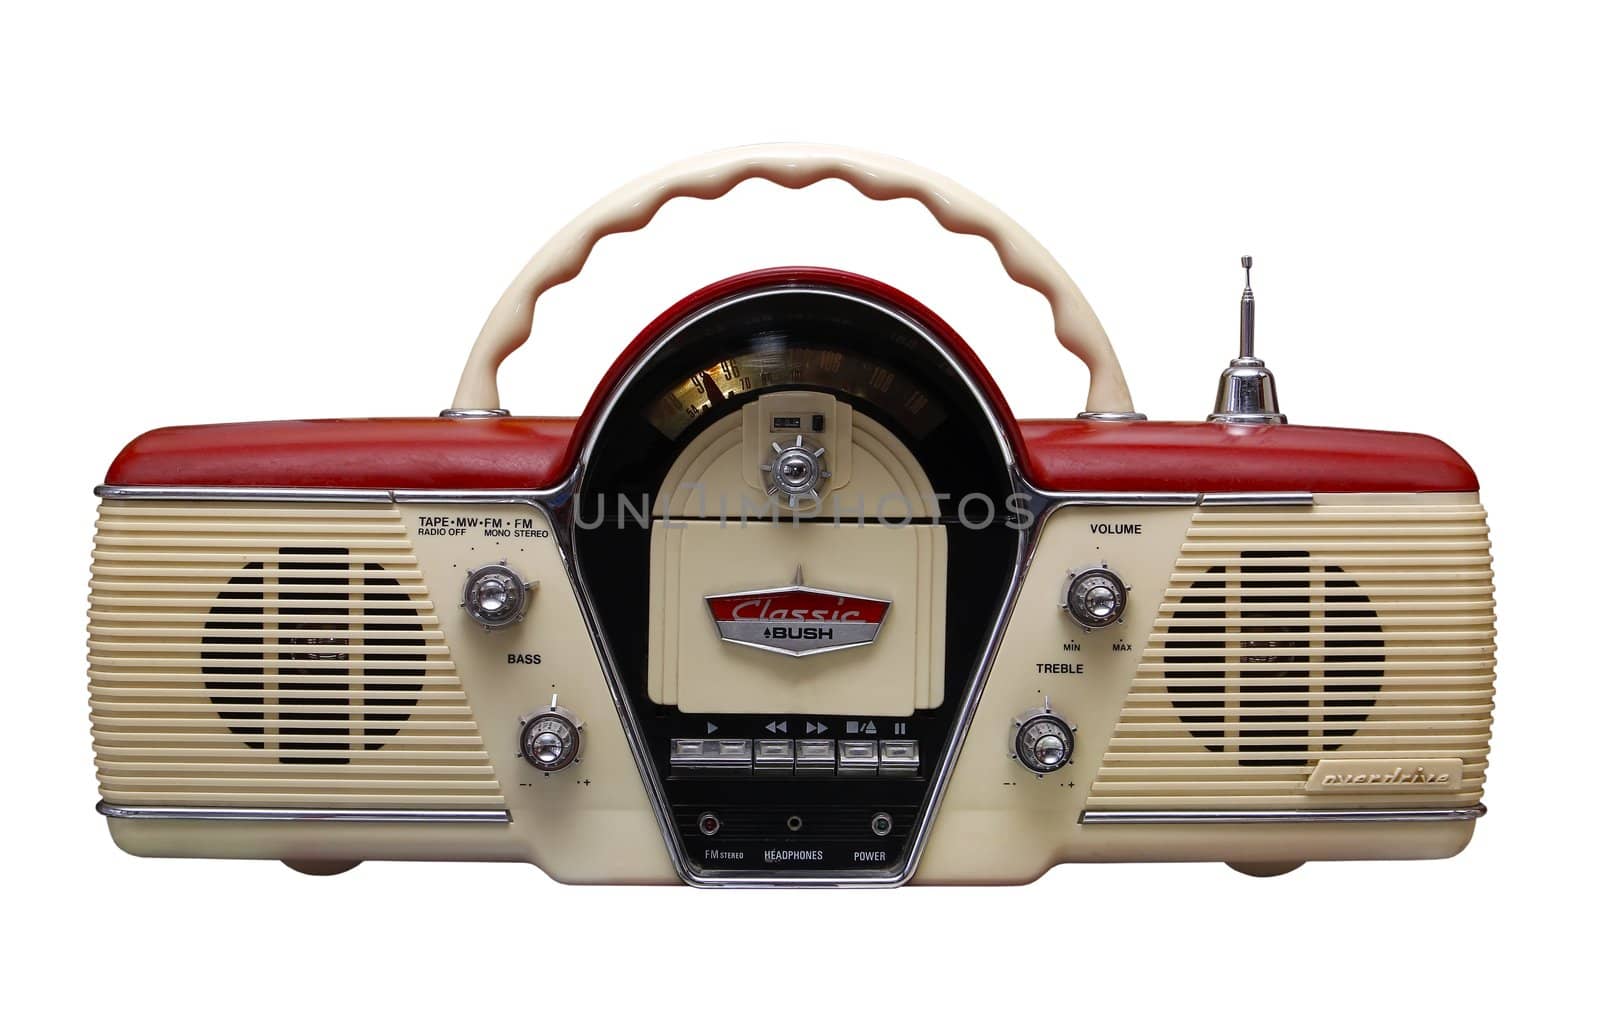 Old radio from 1960 and the years.